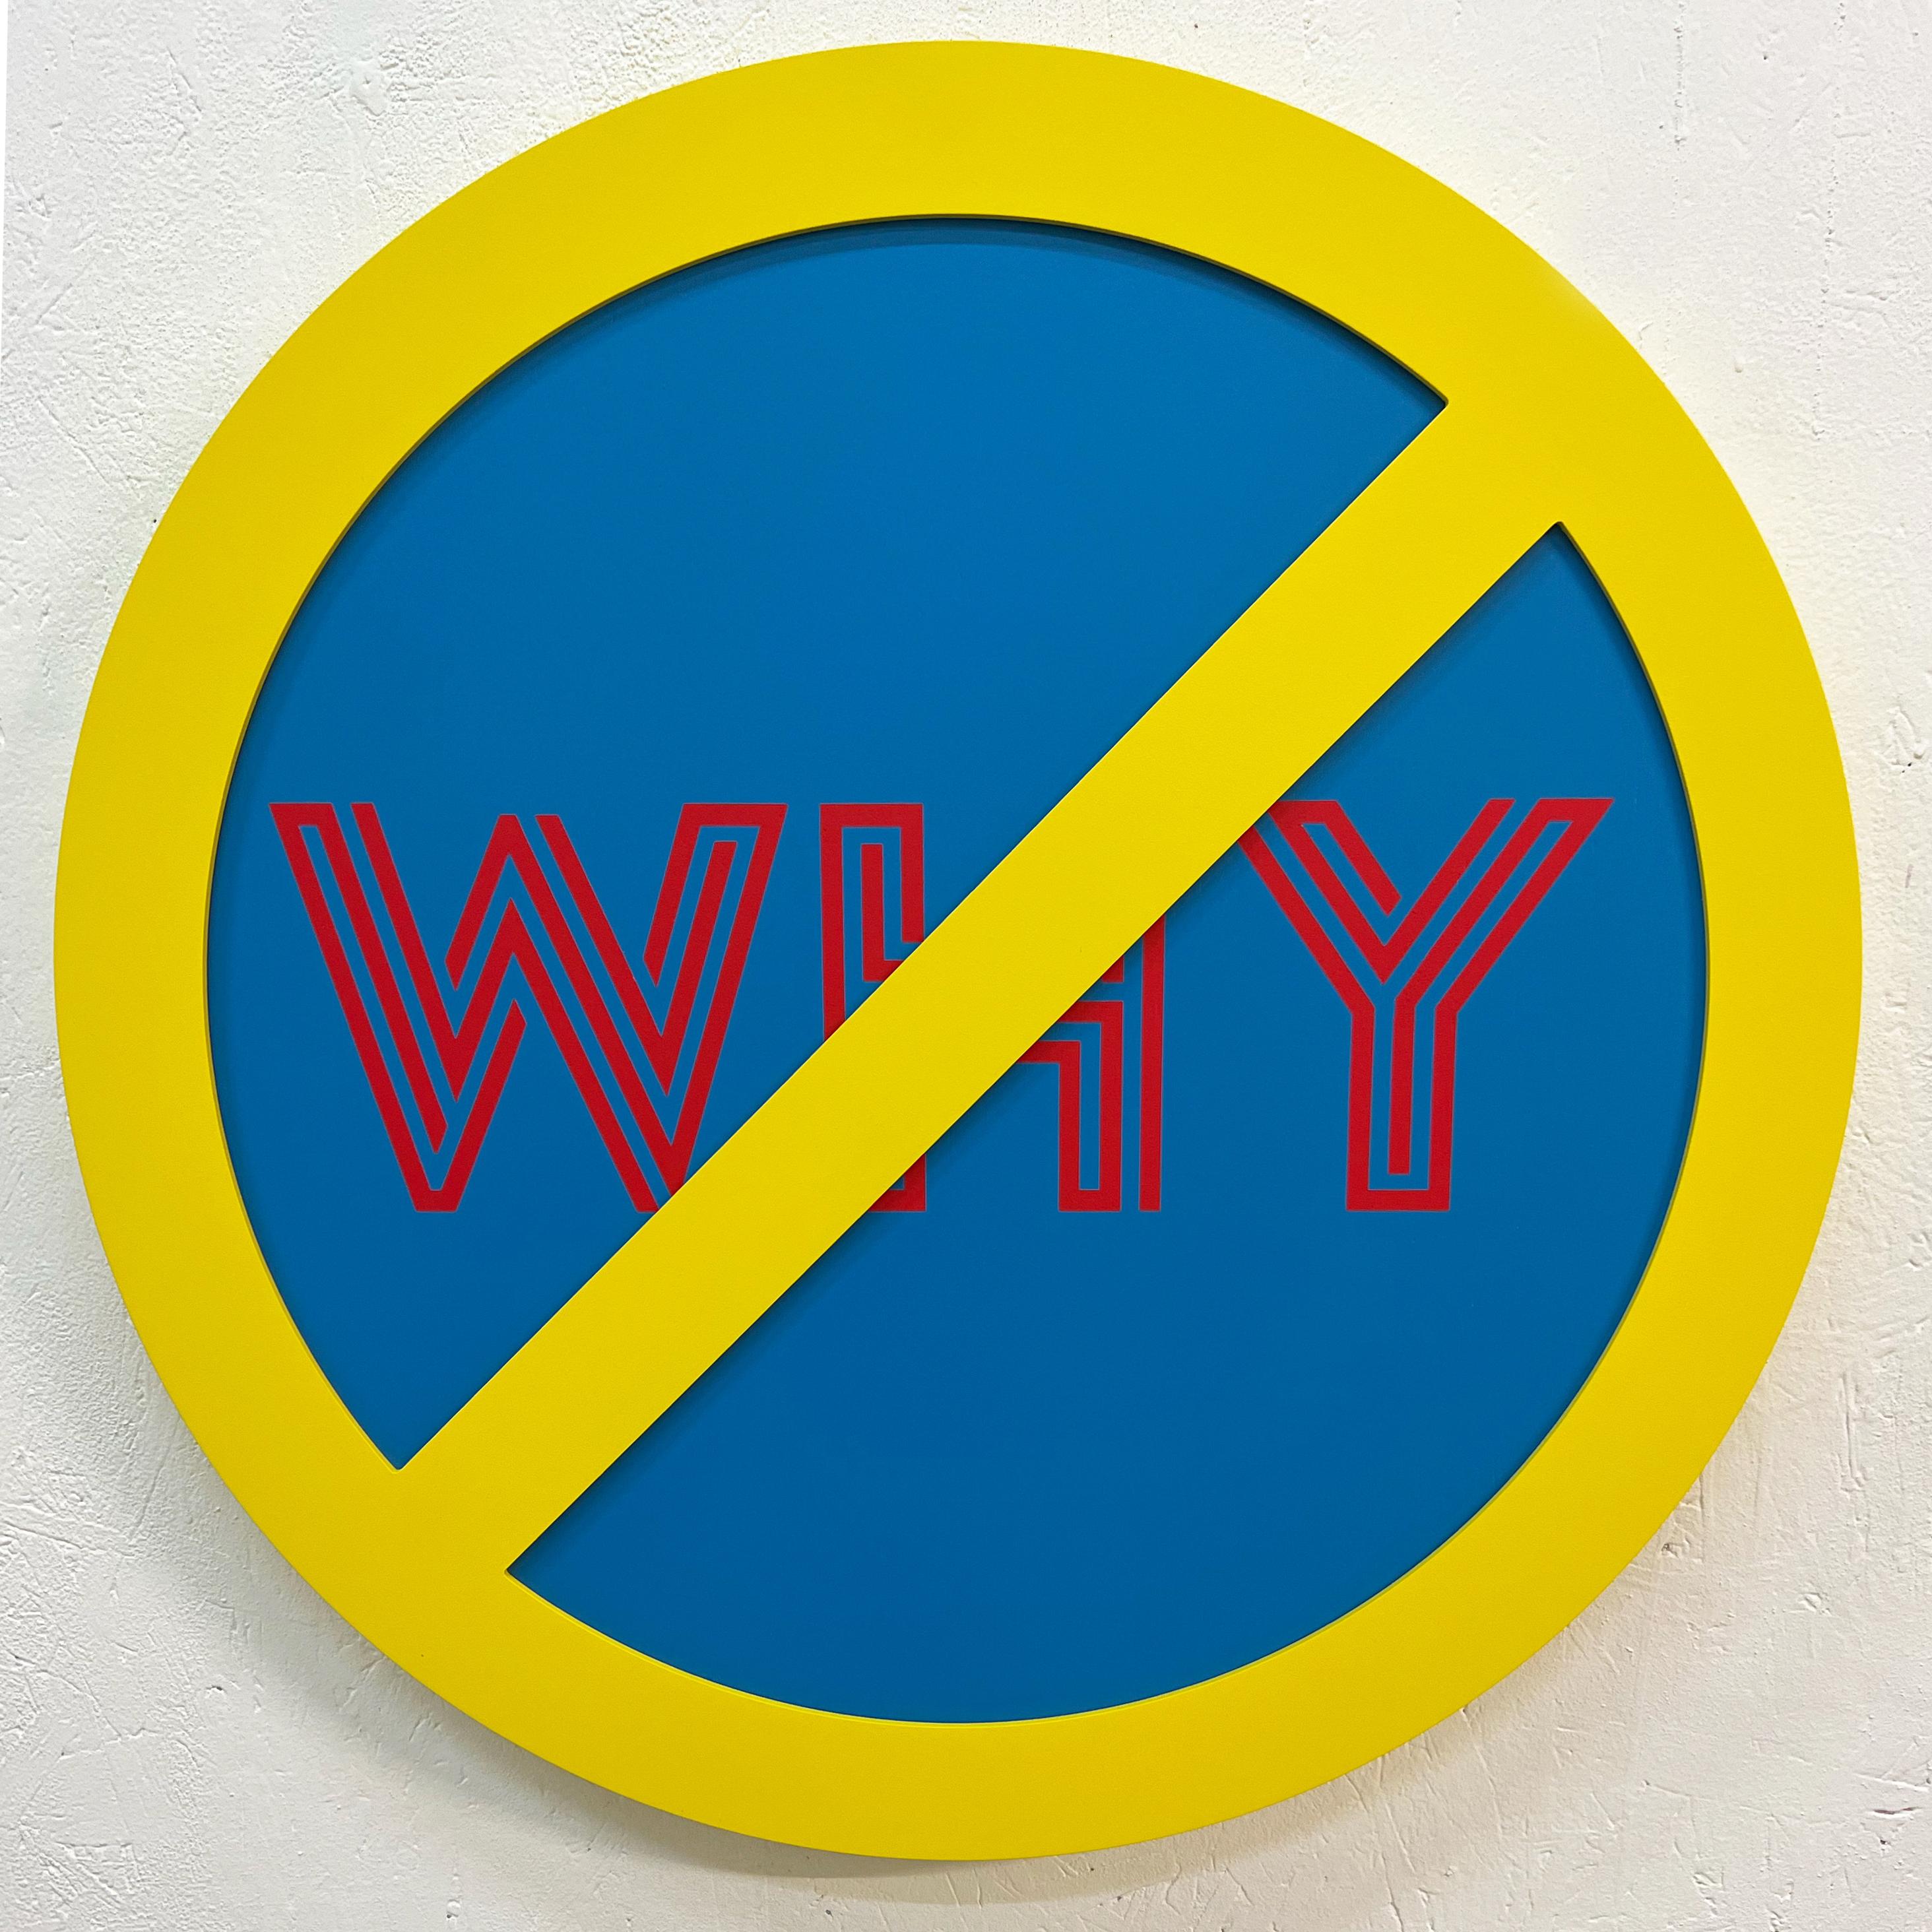 Michael Porten Portrait Painting - "No Why (Red on Blue)" - conceptual art, wall sculpture - Lawrence Weiner